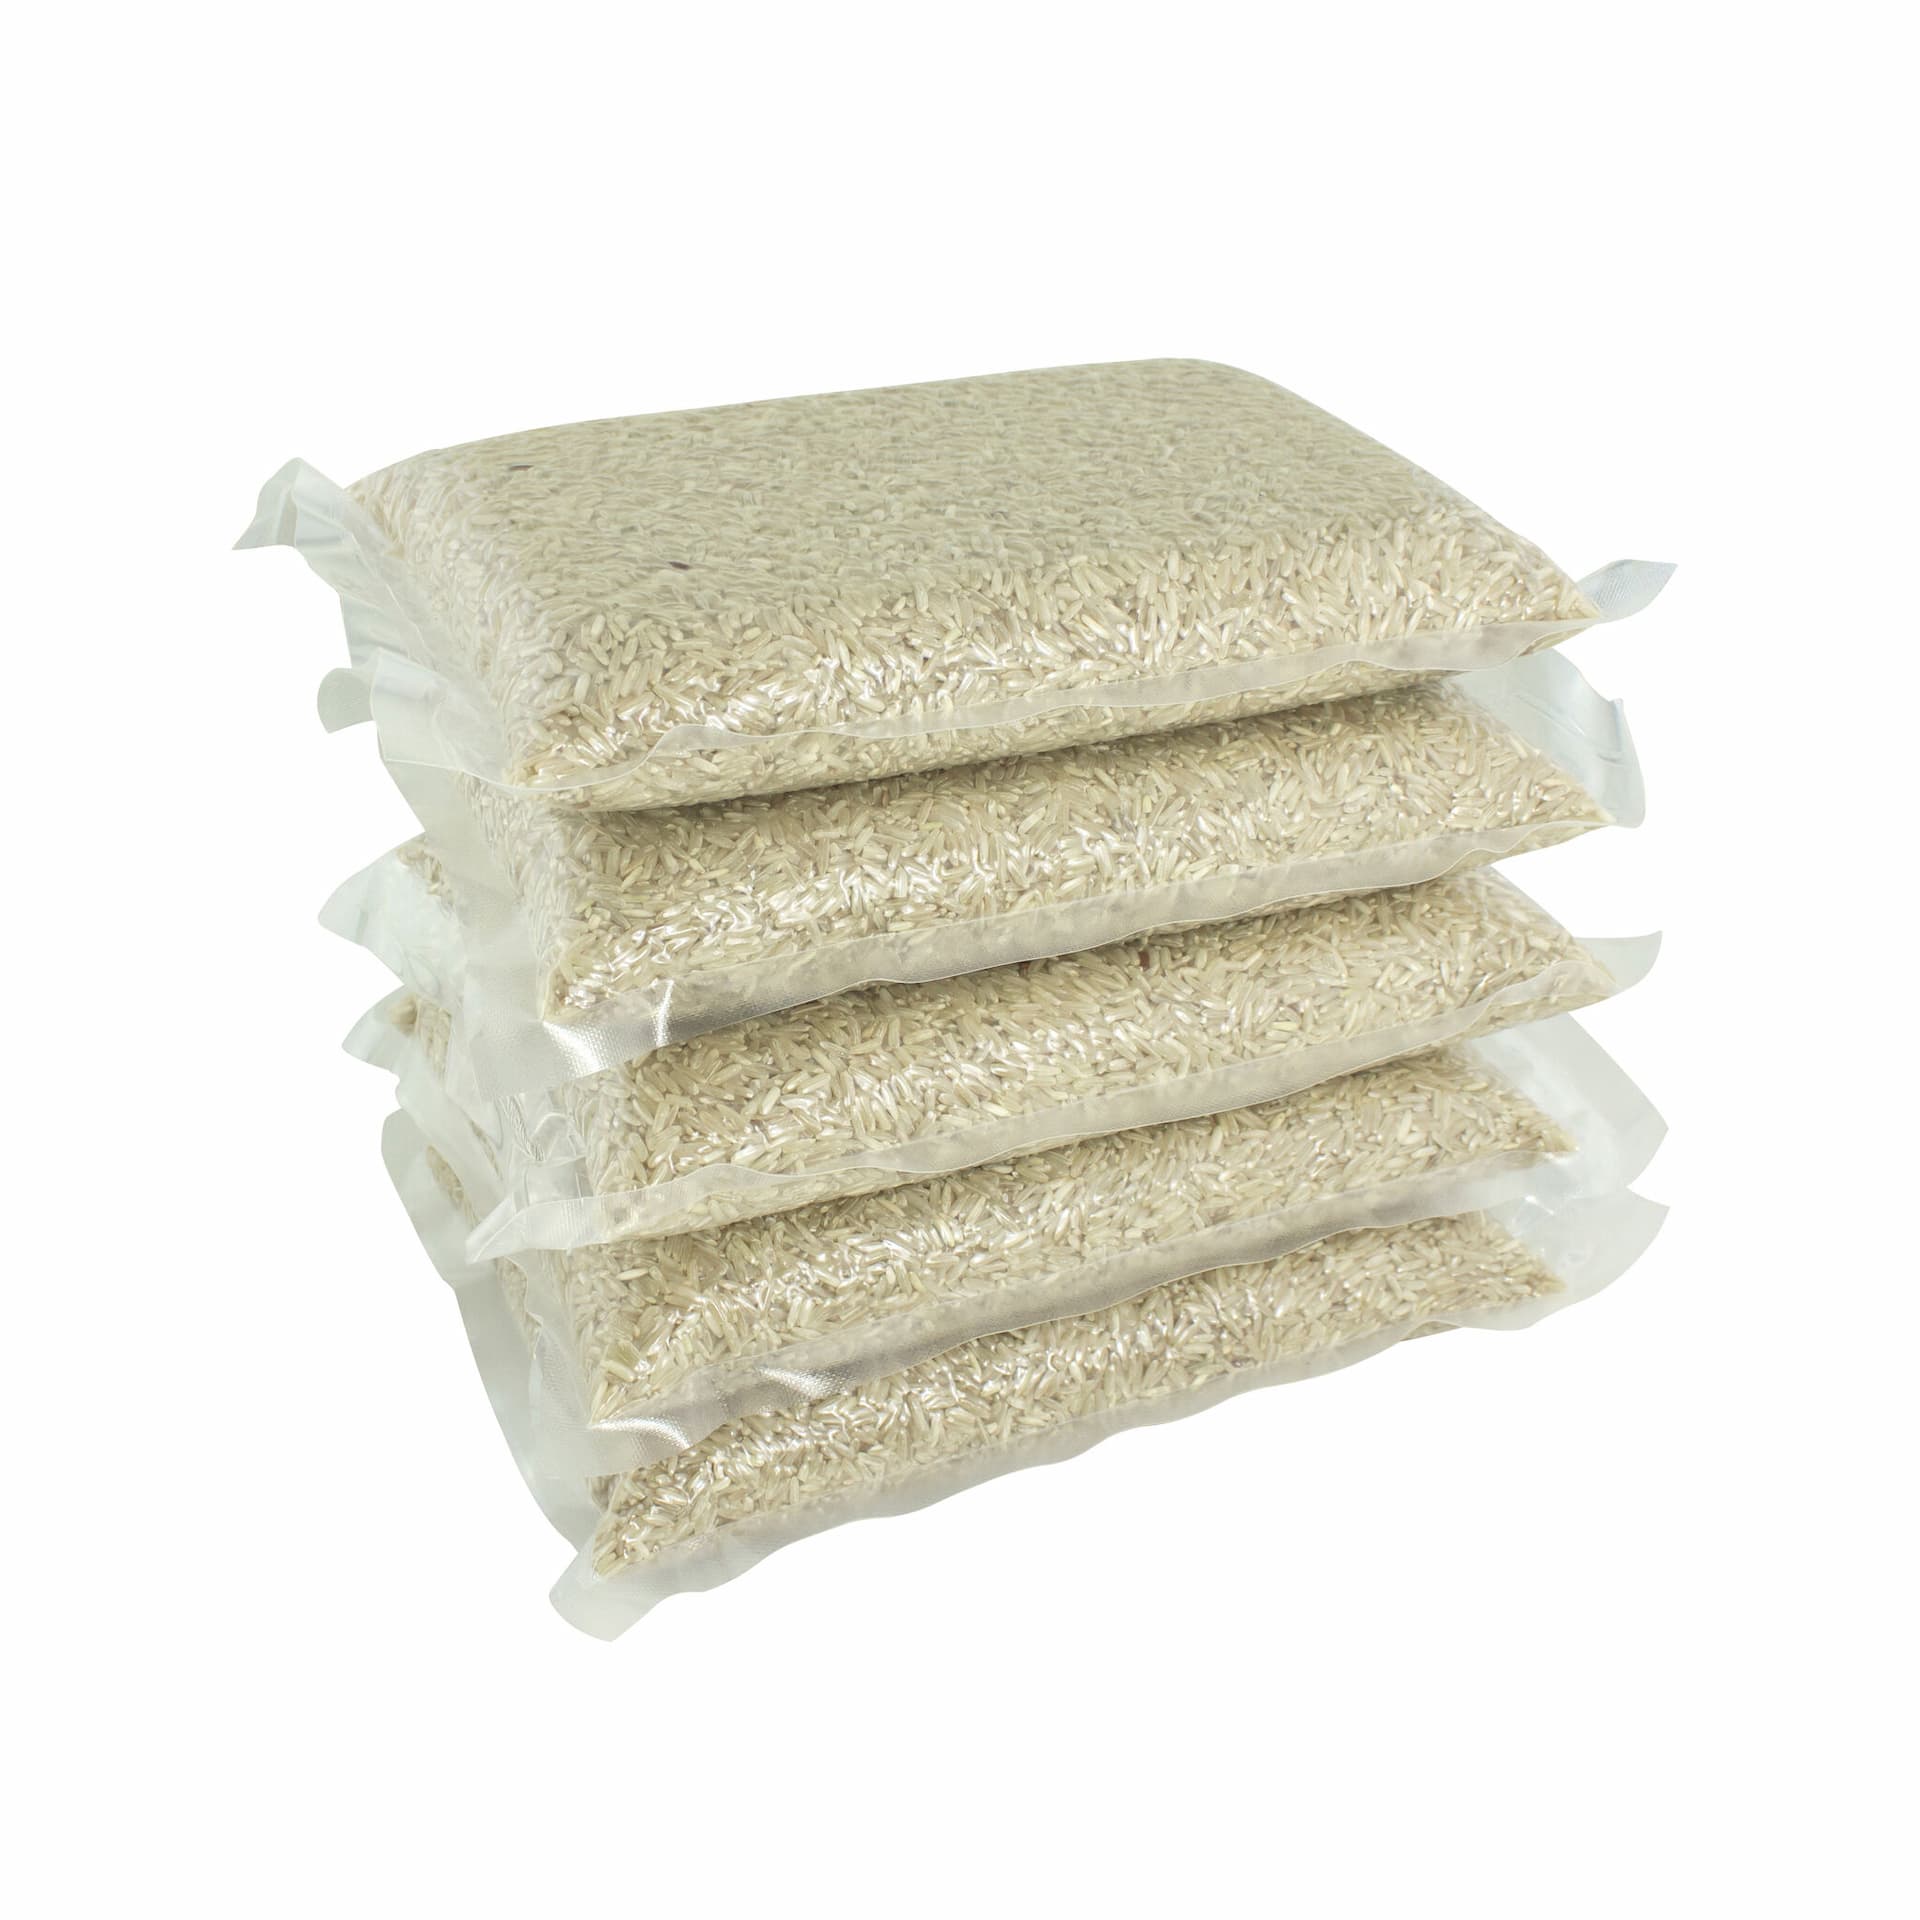 Rice (approx. 1KG)